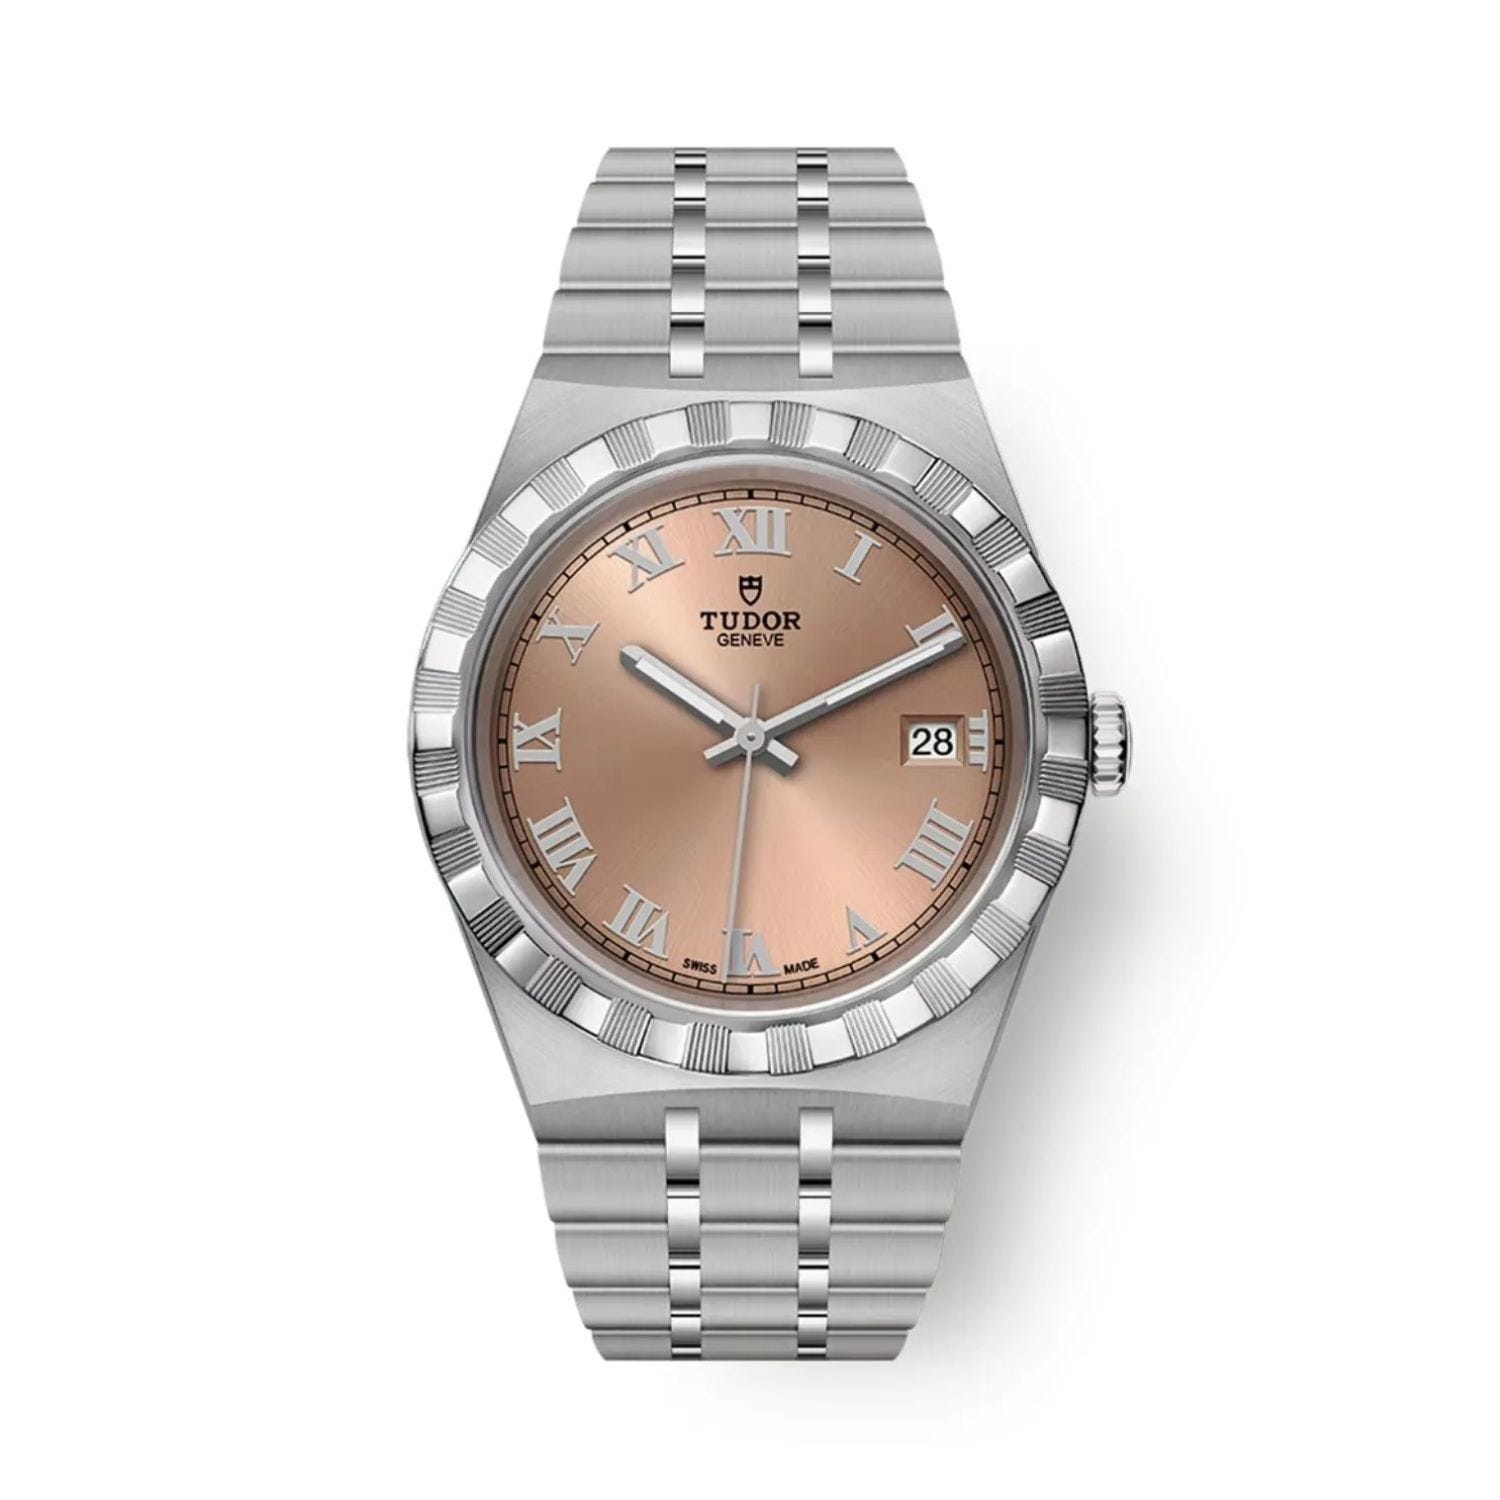 TUDOR Royal, 38mm, Stainless Steel, Calibre T601